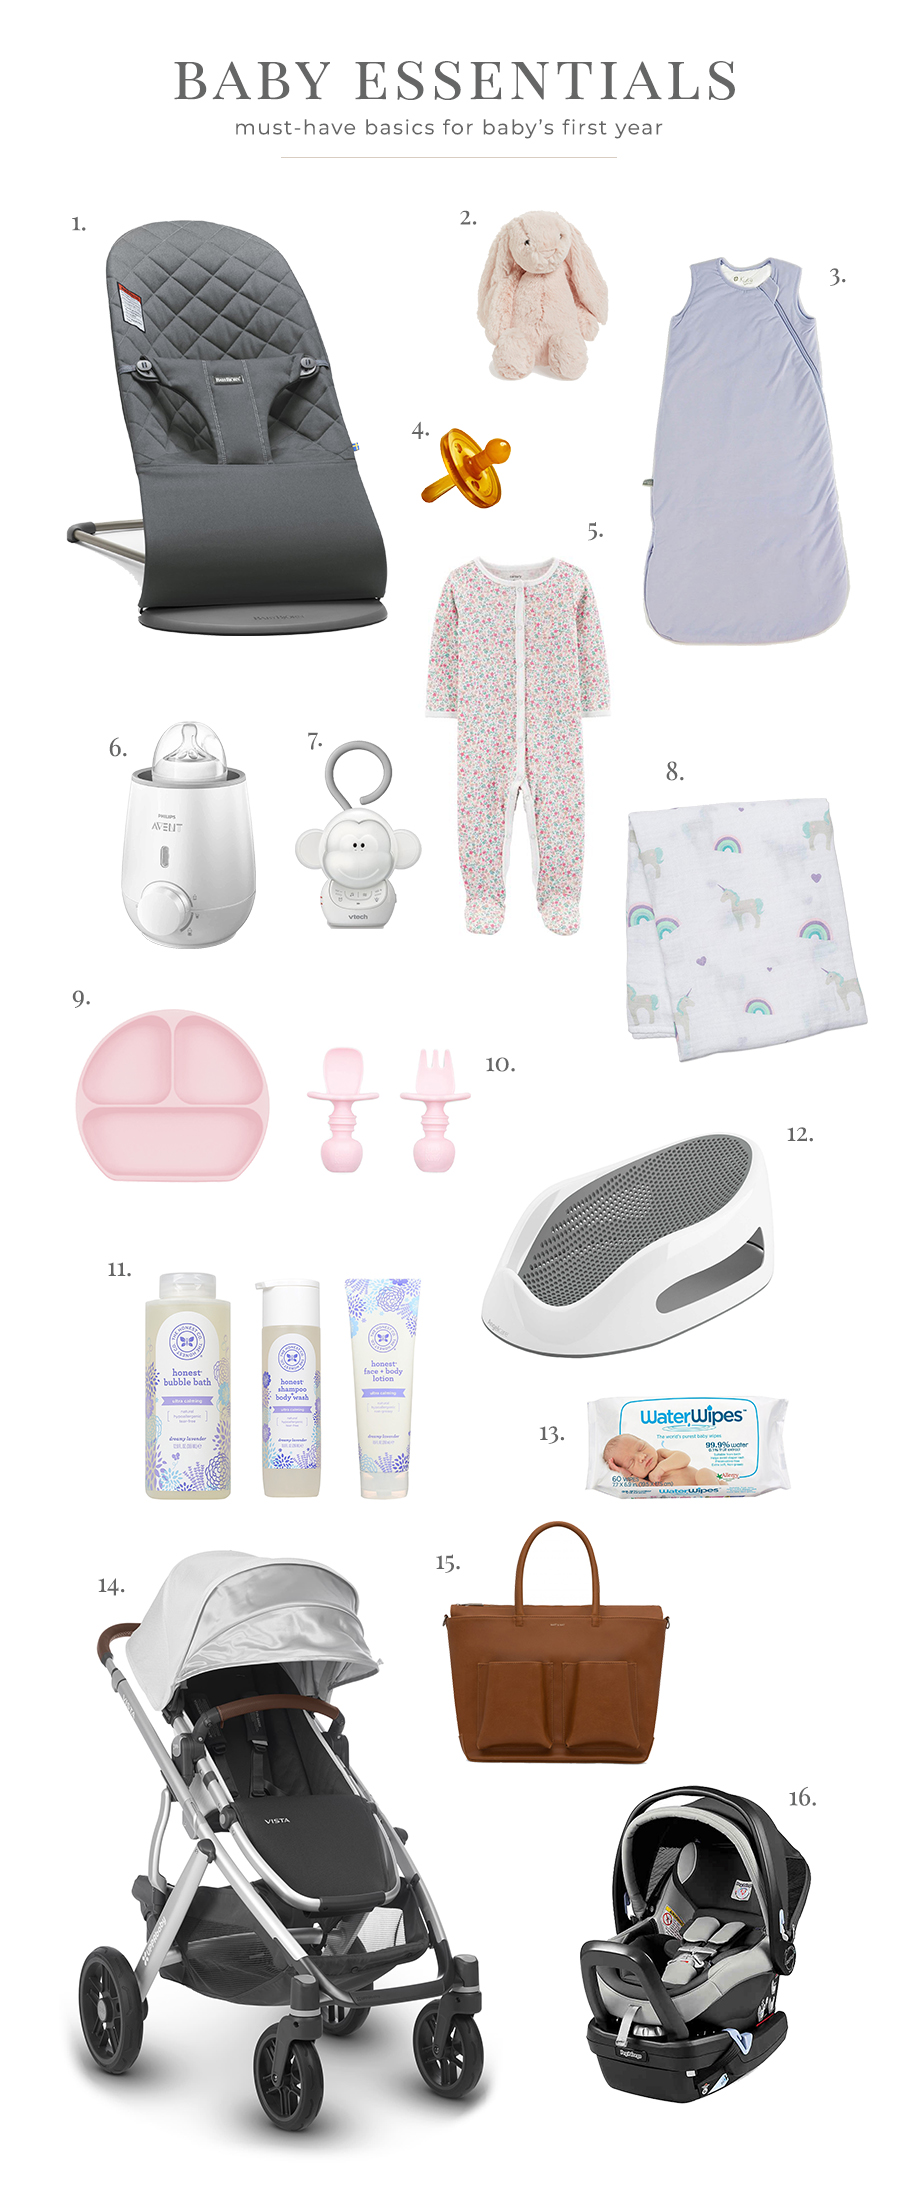 Baby essentials we used the most during the first year - Hello Travel Blog